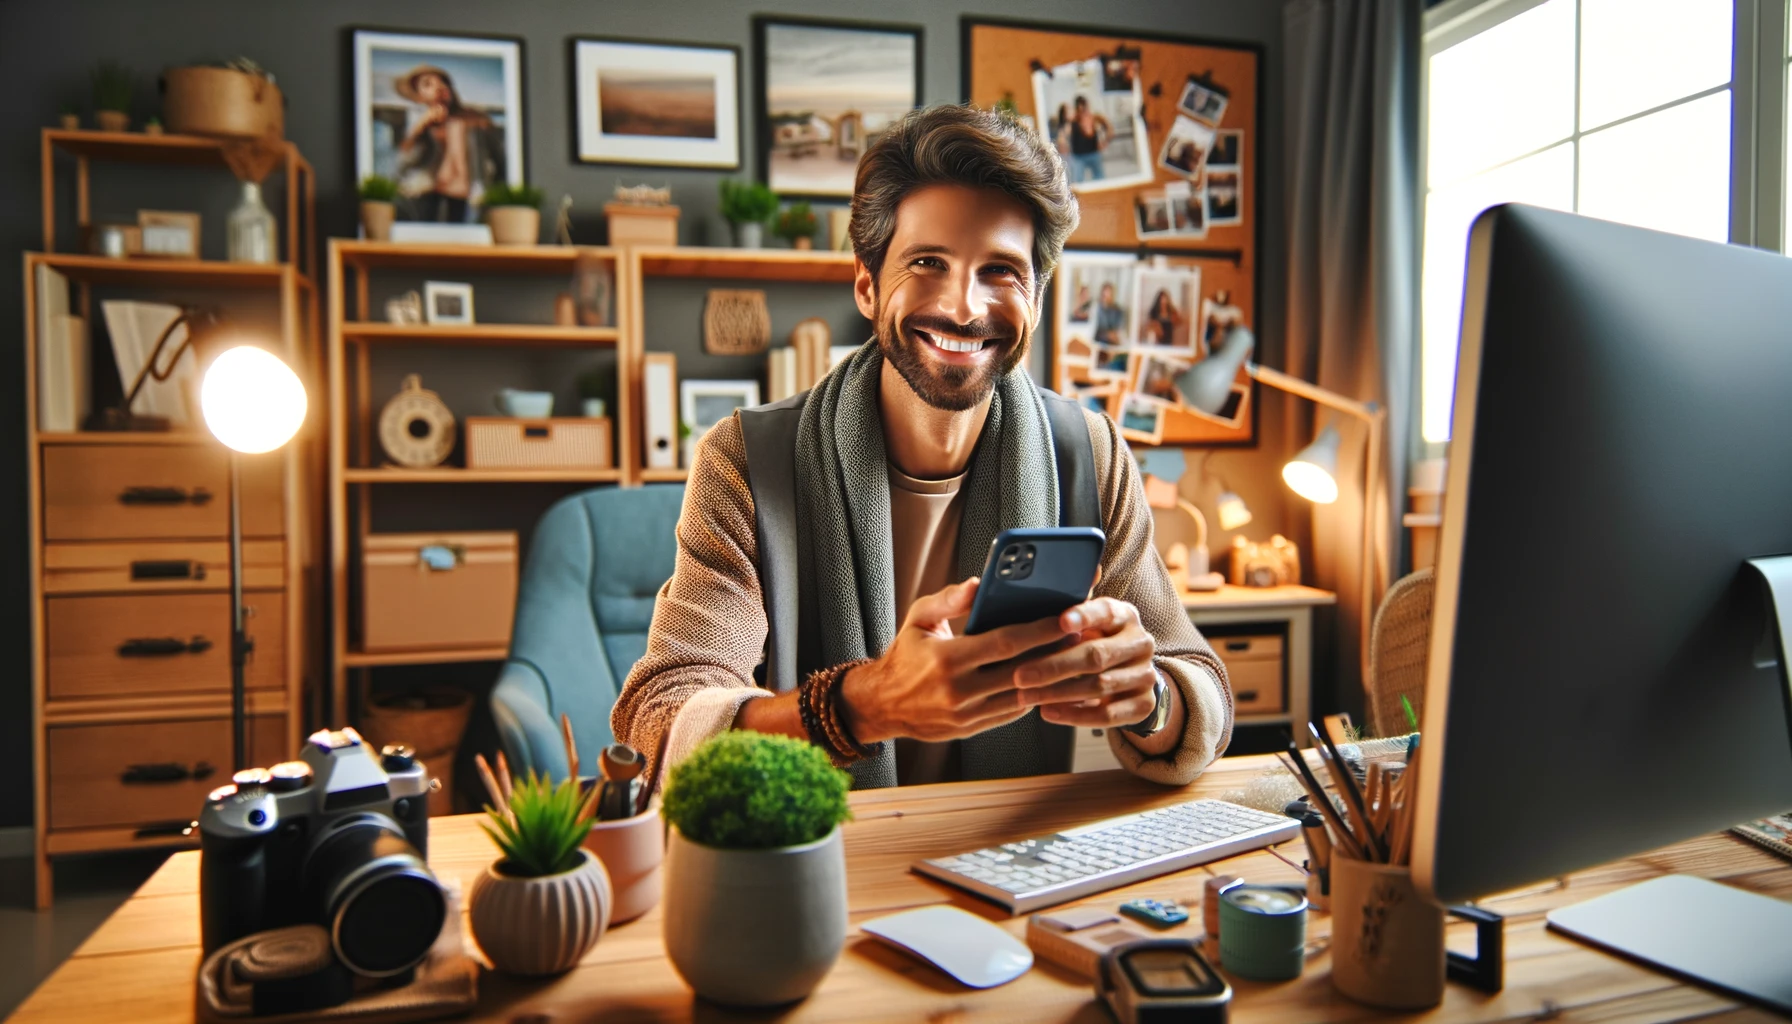 A content individual in a cozy, cute, modern, and fun home office, managing social media on a smart phone. The office features stylish decor, a comfortable chair, a sleek desk with a modern computer setup, and vibrant plants. The individual is smiling, radiating a sense of satisfaction and creativity. The scene is captured in a photorealistic style, emulating a photo taken with a Canon EOS R5 camera using a Canon RF 24-70mm F2.8 L IS USM lens. The image settings mimic f/2.8 aperture, 1/125 sec exposure, and ISO 200. Aspect ratio: 16:9.